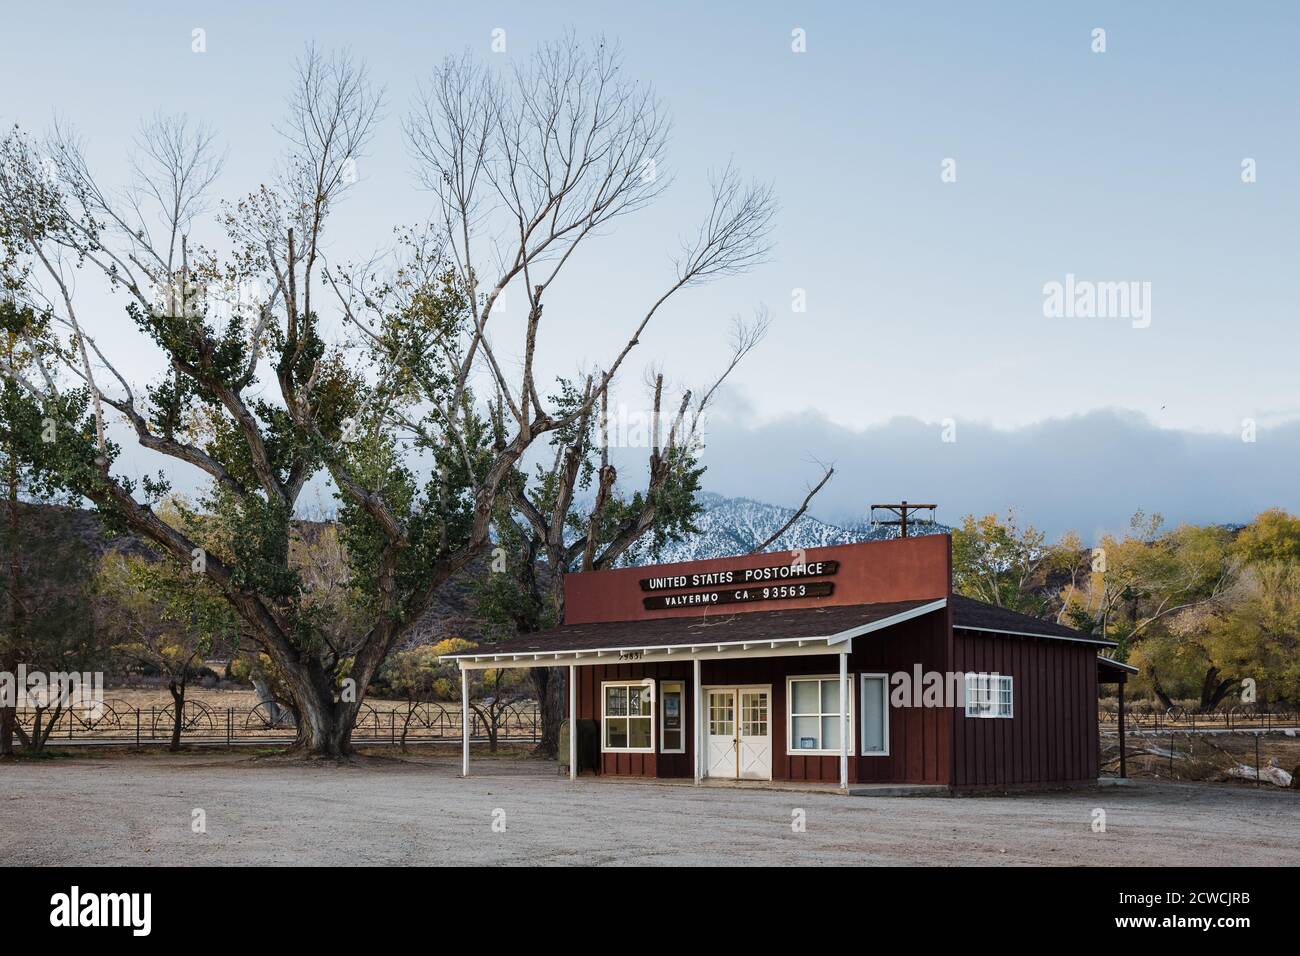 VALYERMO, UNITED STATES - Nov 27, 2018: Picturesque autumn setting with small, rural post office in Valyermo, California Stock Photo